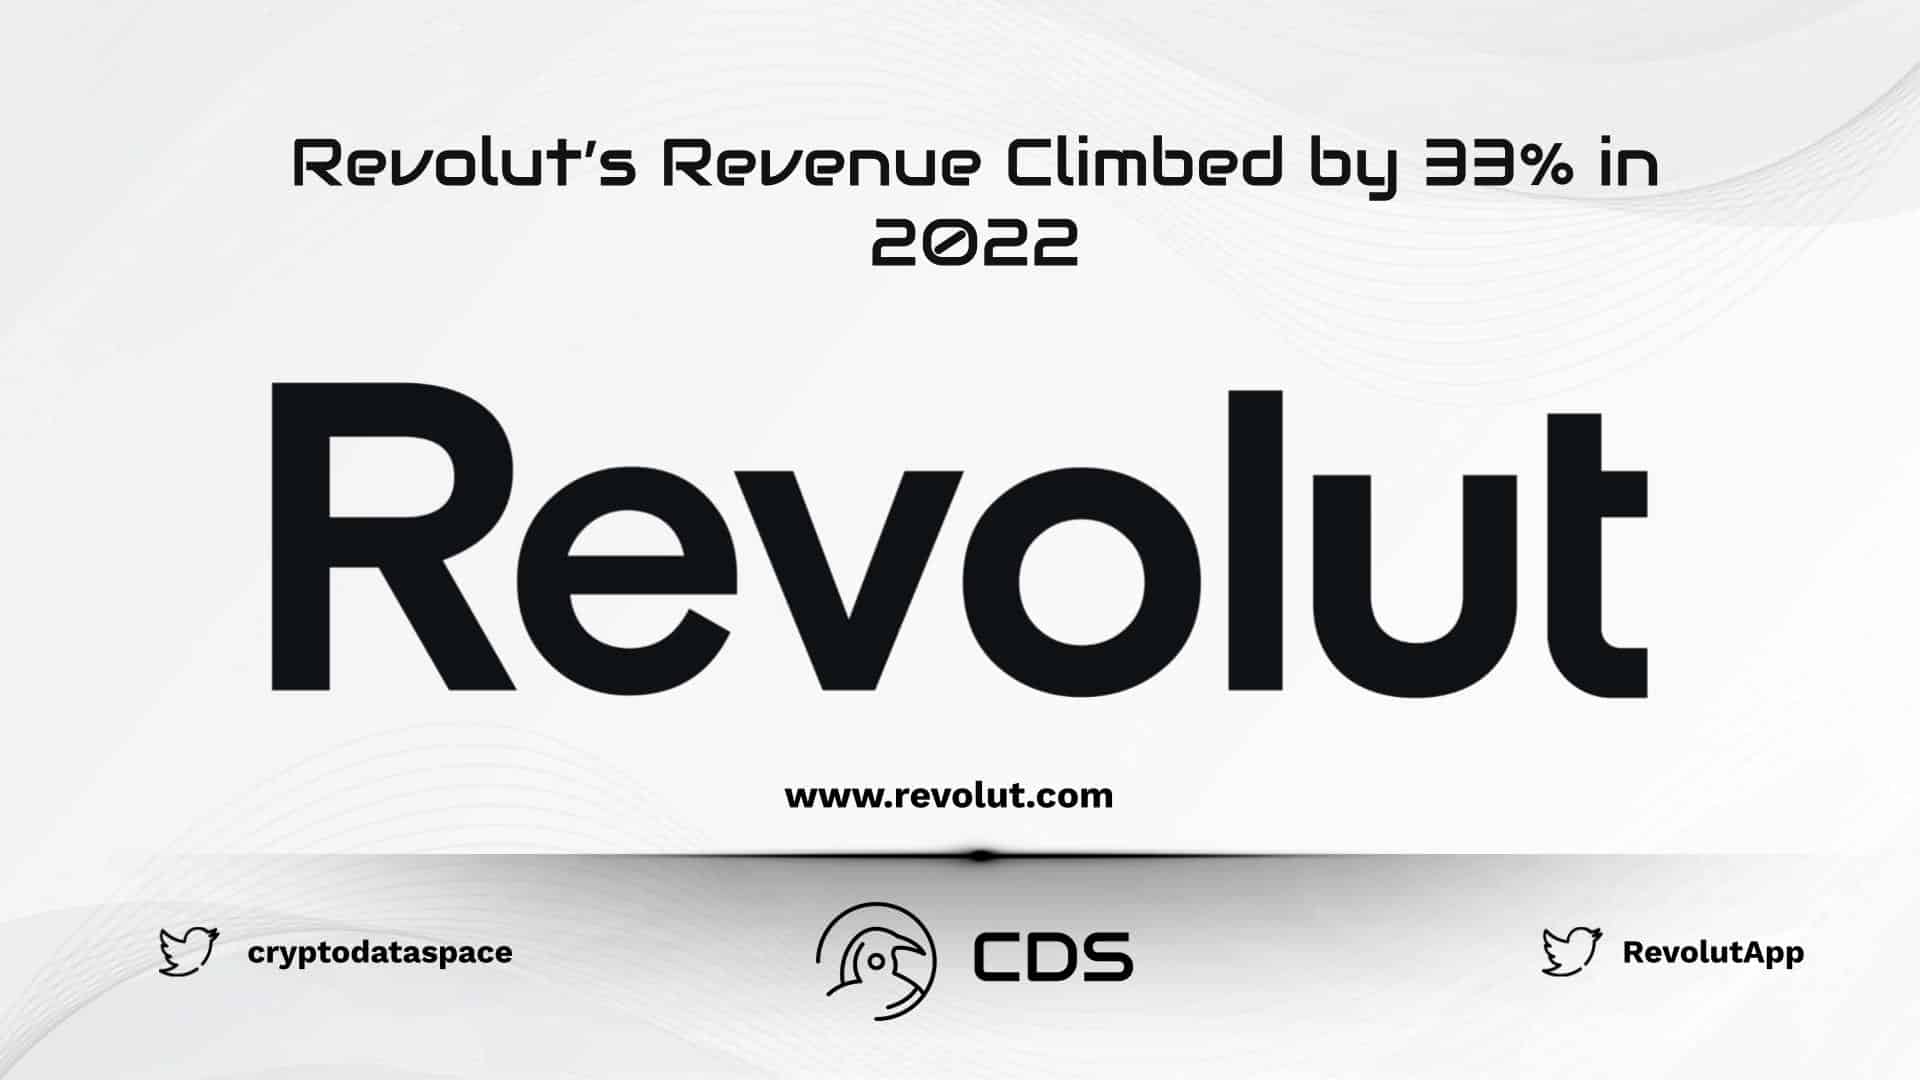 Revolut’s Revenue Climbed by 33% in 2022